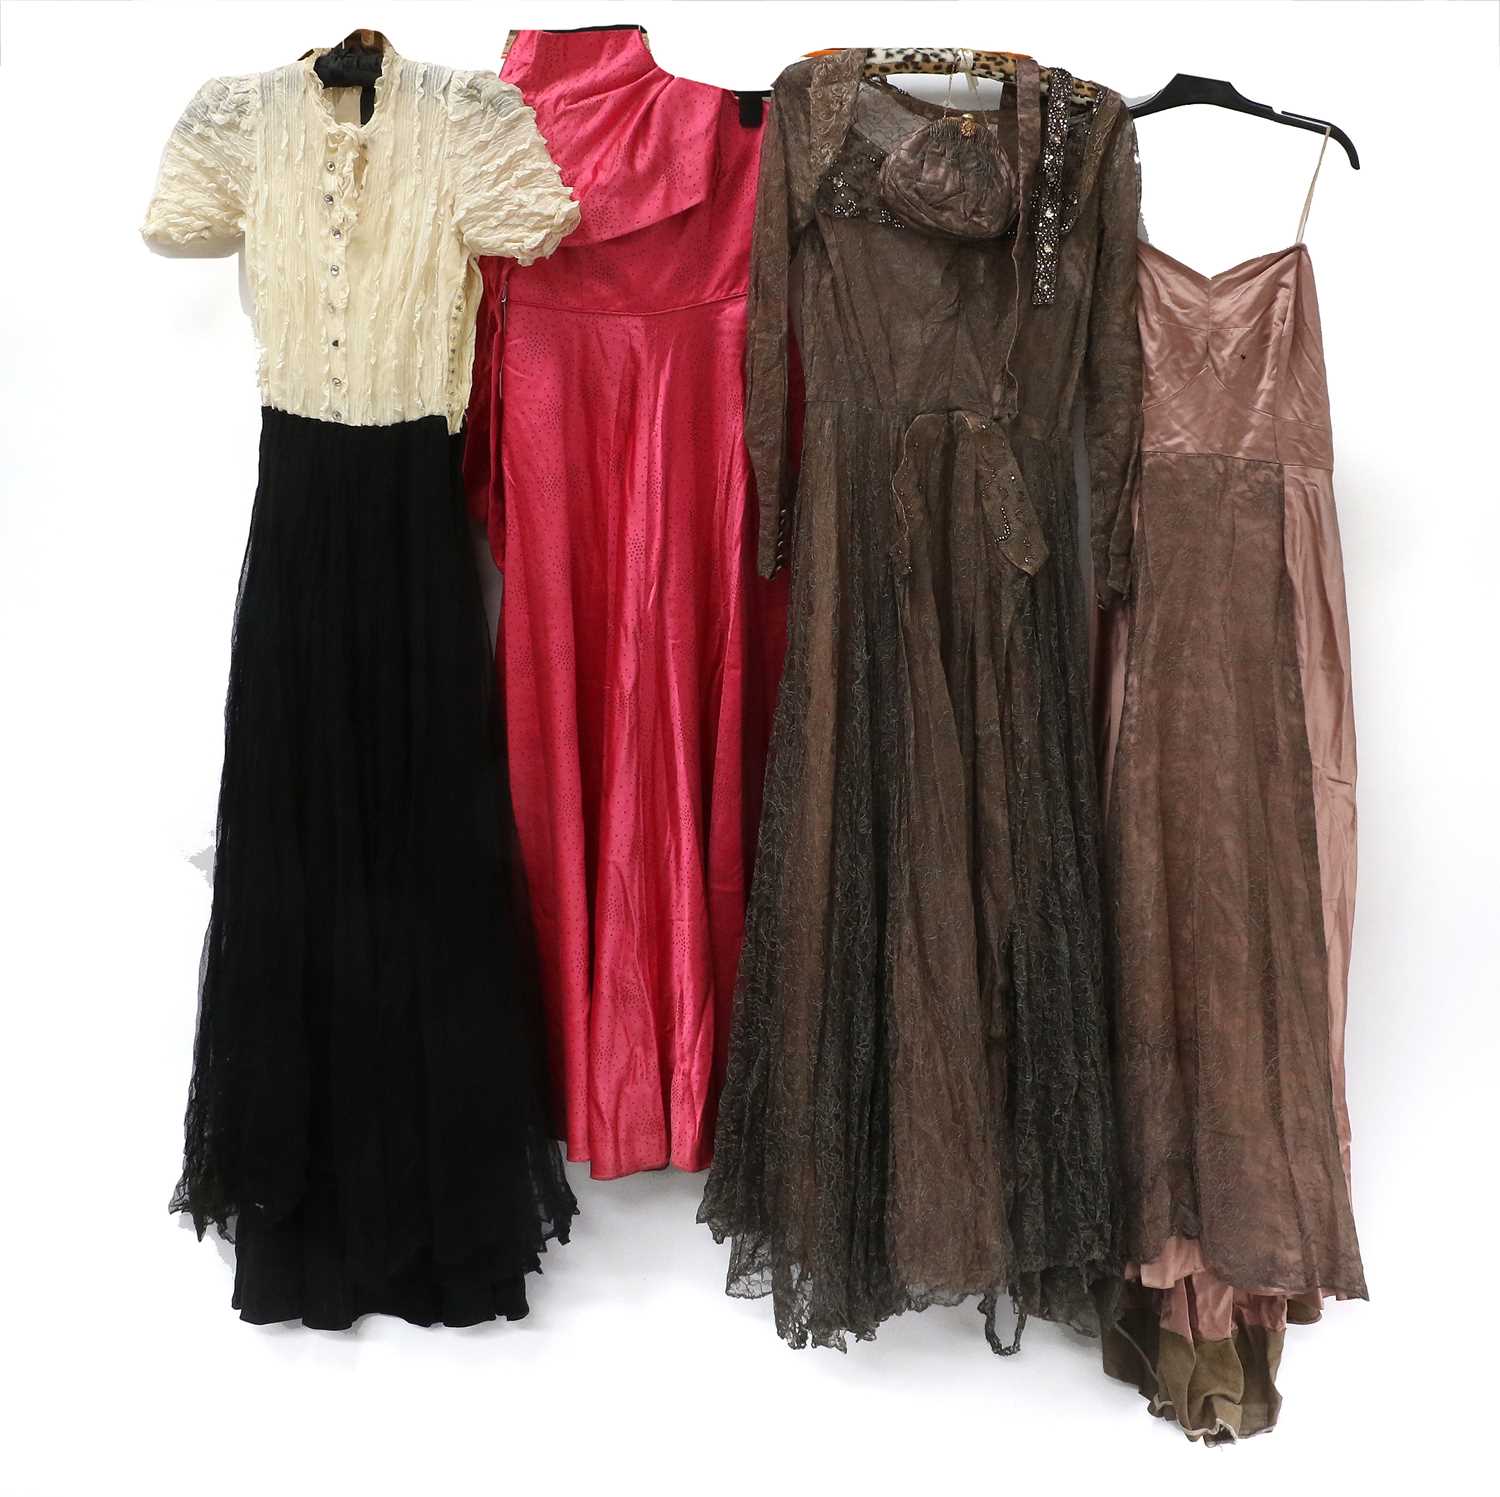 Circa 1940s and Later Evening Dresses, comprising a pink satin strapless evening dress with spot